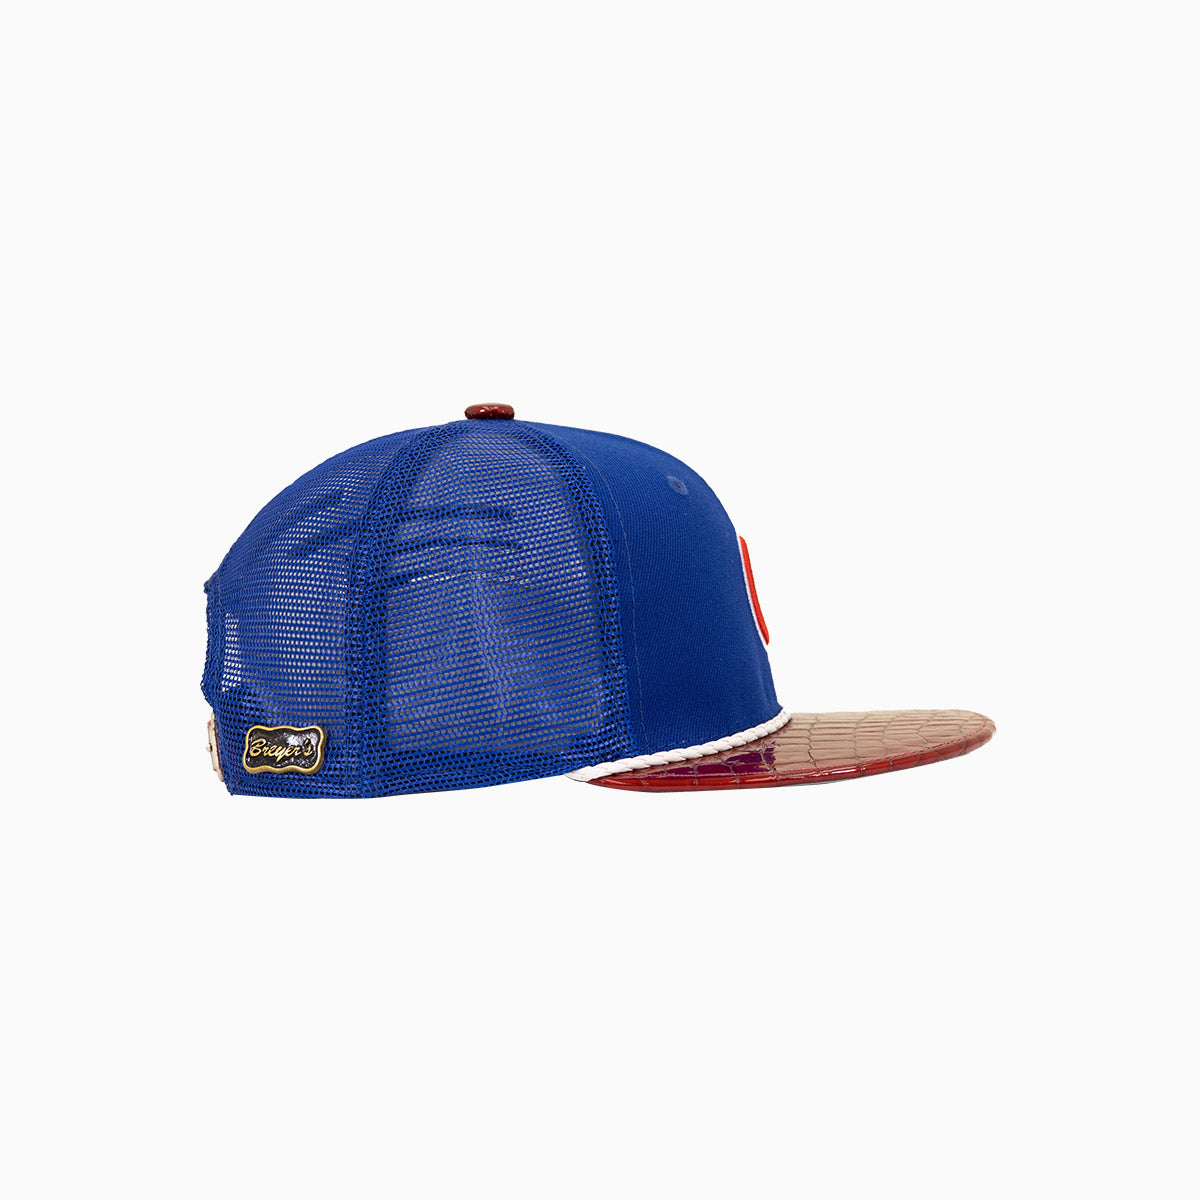 breyers-buck-50-chicago-cubs-trucker-hat-with-leather-visor-breyers-tccth-blue-red